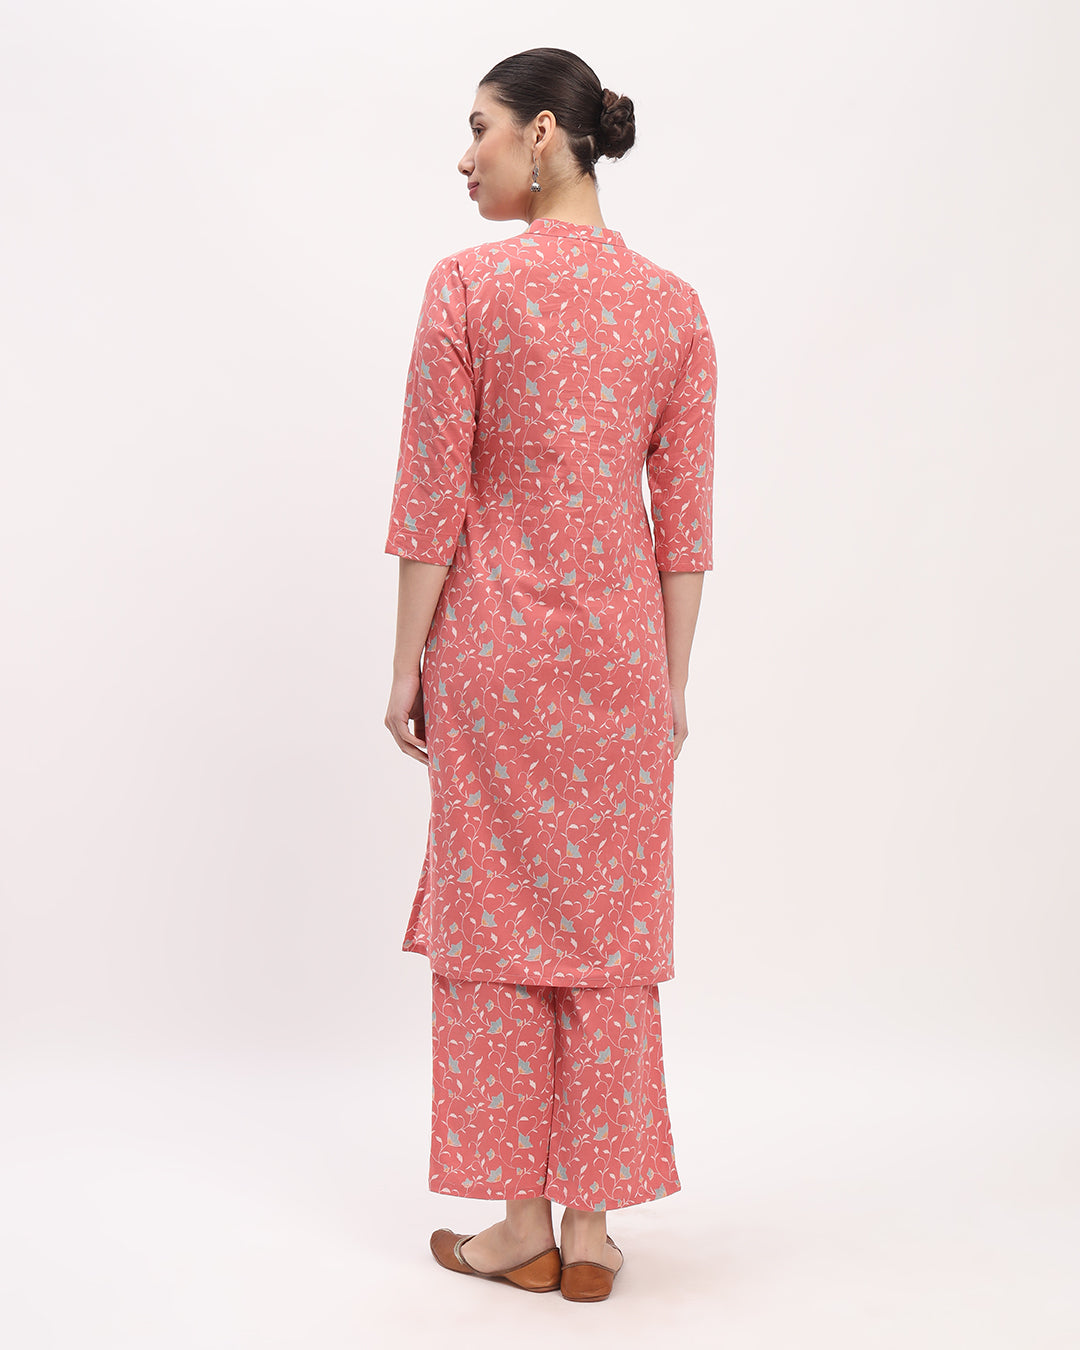 Combo: English Floral Garden & Pink Chic Lines High-Low Printed Kurta (Without Bottoms)